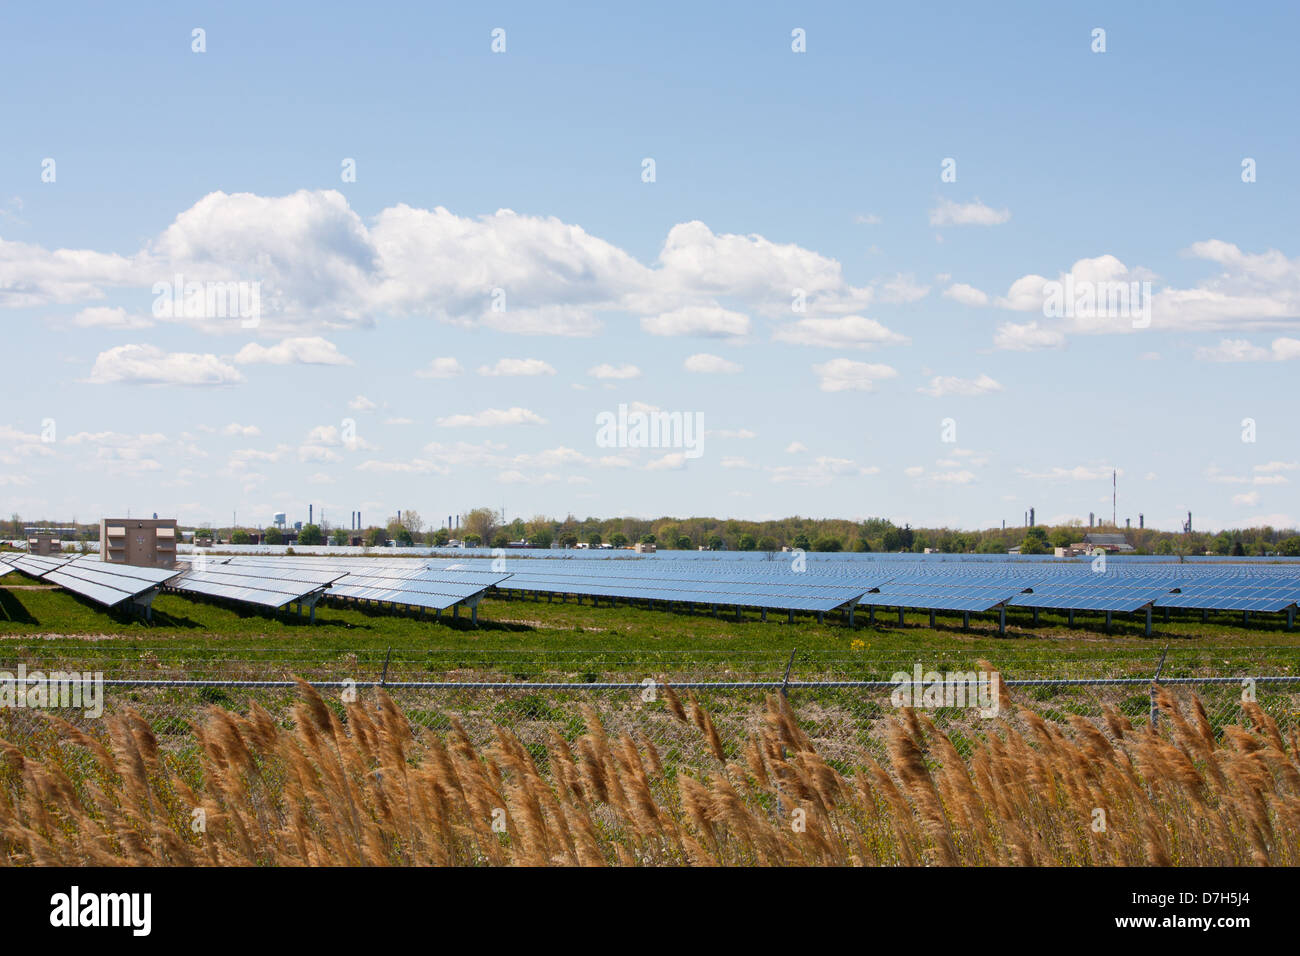 Acres of farmland covered with solar panels, at this large scale solar farm in Sarnia Ontario, Canada. Stock Photo